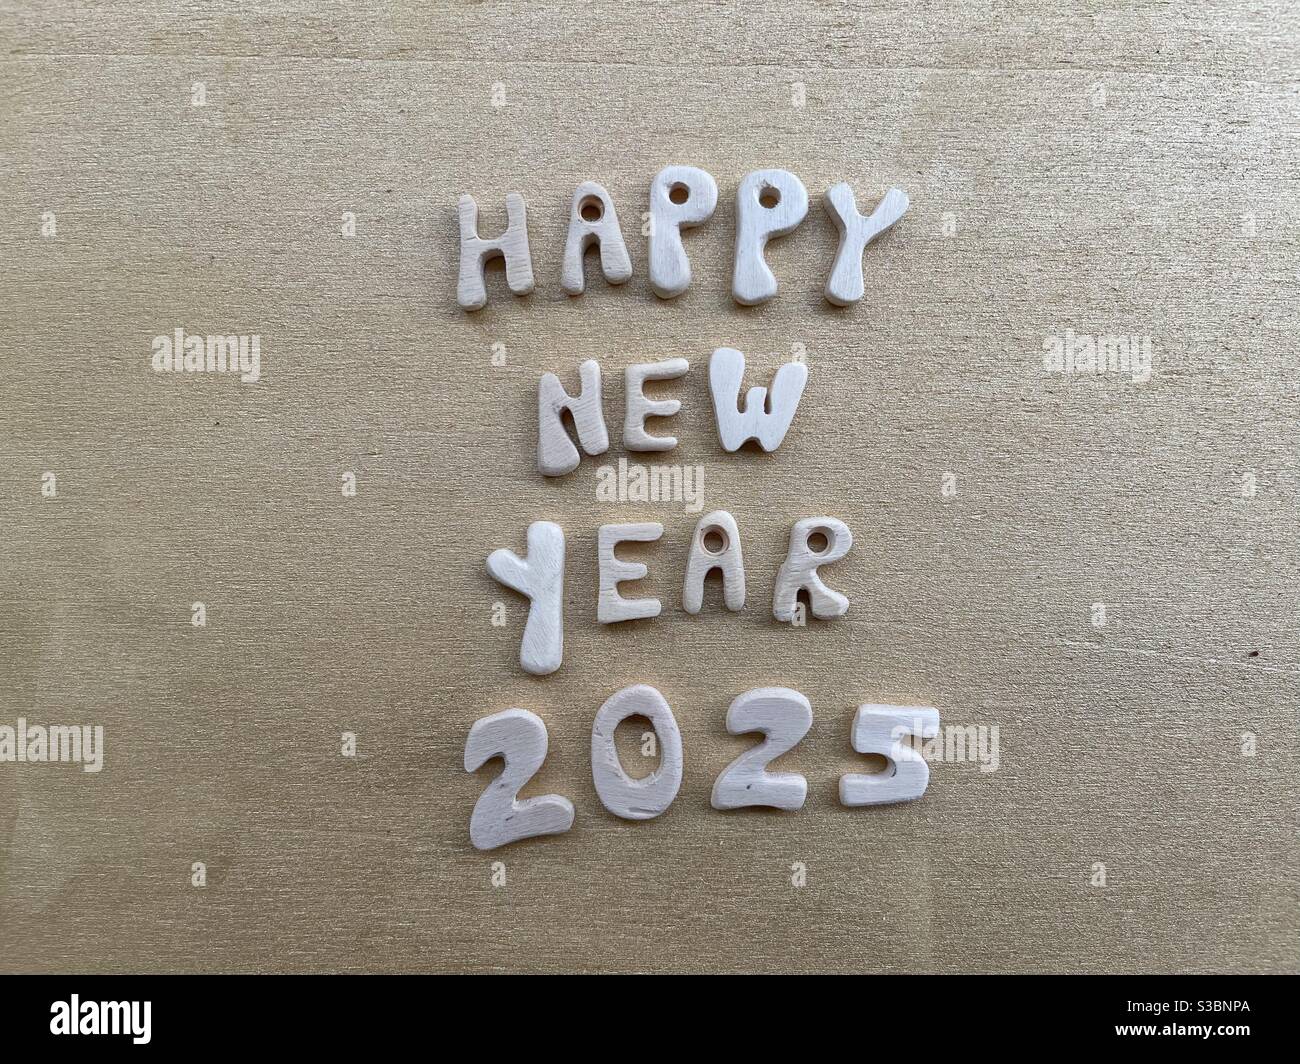 Happy New Year 2025 with wooden letters and numbers Stock Photo